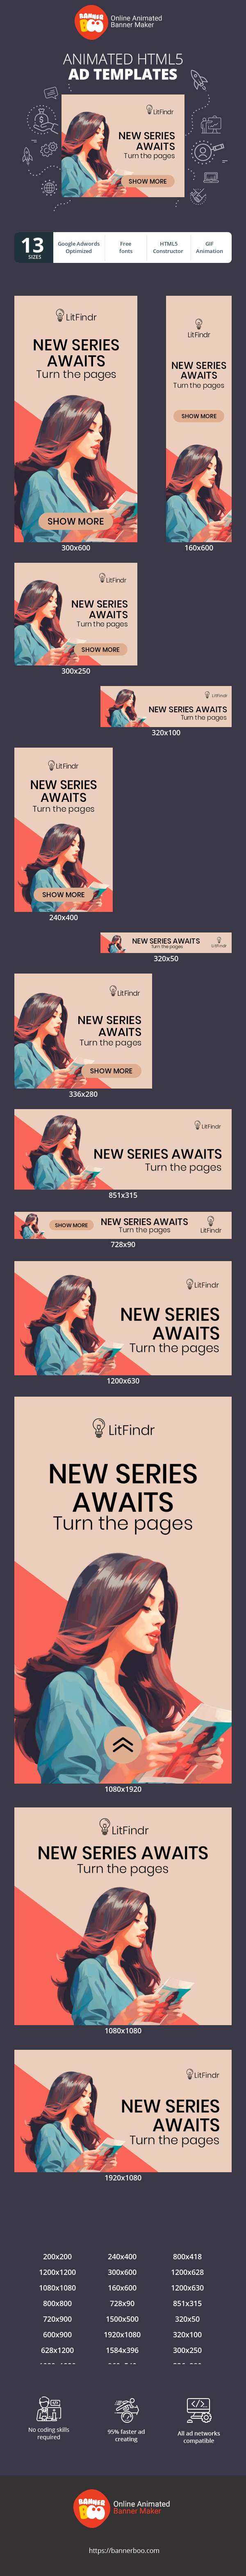 Banner ad template — New Series Awaits — Turn The Pages